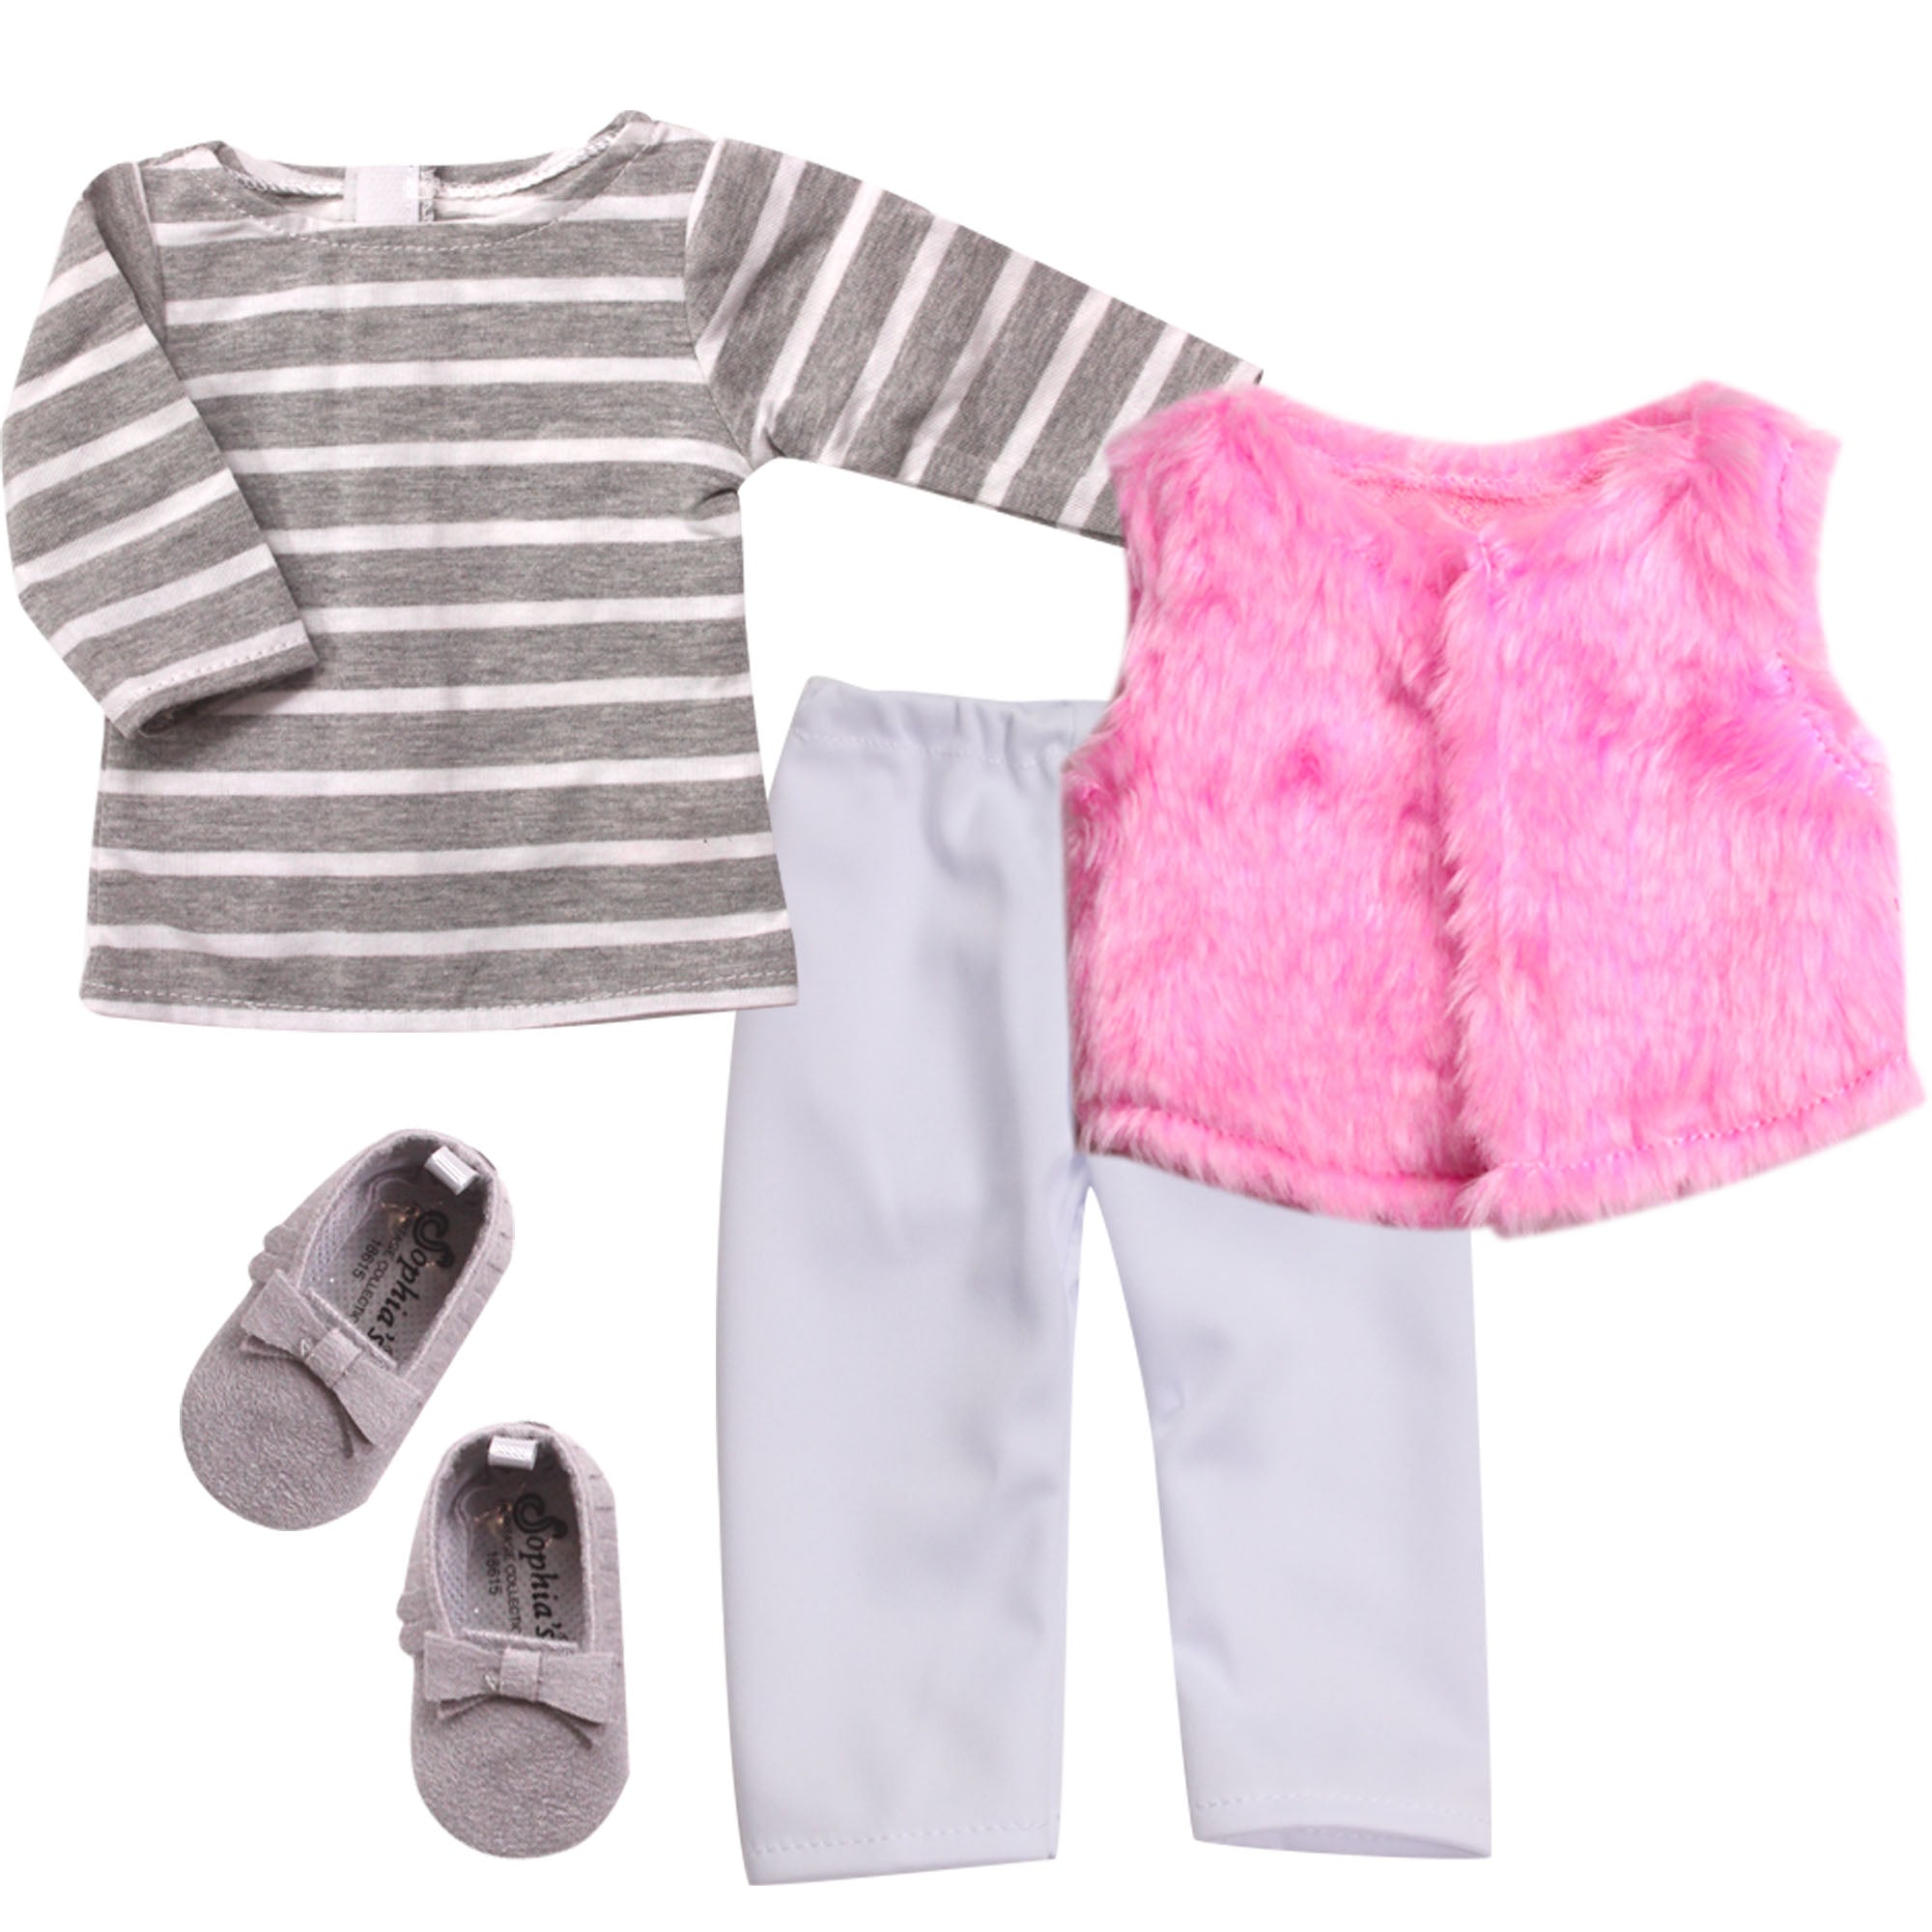 Sophia's 4 Piece Winter Outfit with Shoes Set for 15'' Dolls, Pink/Gray